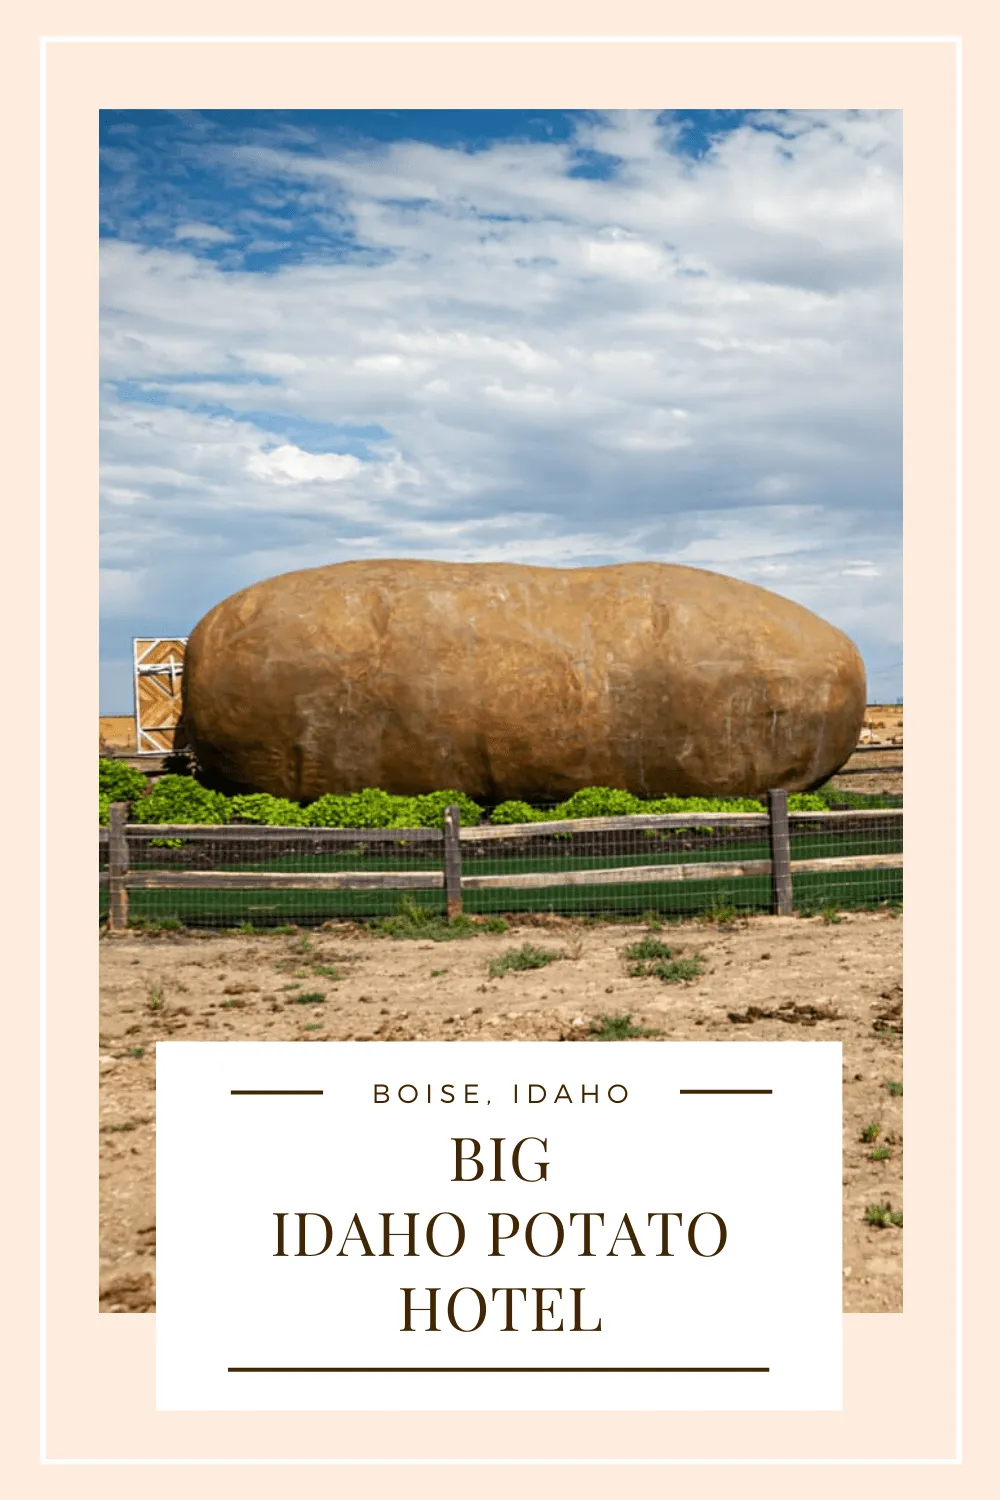 The Big Idaho Potato Hotel AirBNB in Boise, Idaho is an AirBNB made from a giant potato hosted by Kristie Wolfe. Spend the night in an Idaho roadside attraction. Add this weird AirBNB to your travel bucket list and road trip itinerary for a fun Idaho road trip! #AirBNB #Potato #IdahoRoadsideAttractions #IdahoRoadsideAttraction #RoadsideAttractions #RoadsideAttraction #RoadTrip #IdahoRoadTrip #IdahoRoadTripBucketLists #IdahoBucketList #ThingsToDoInIdaho #weirdroadsideattractions